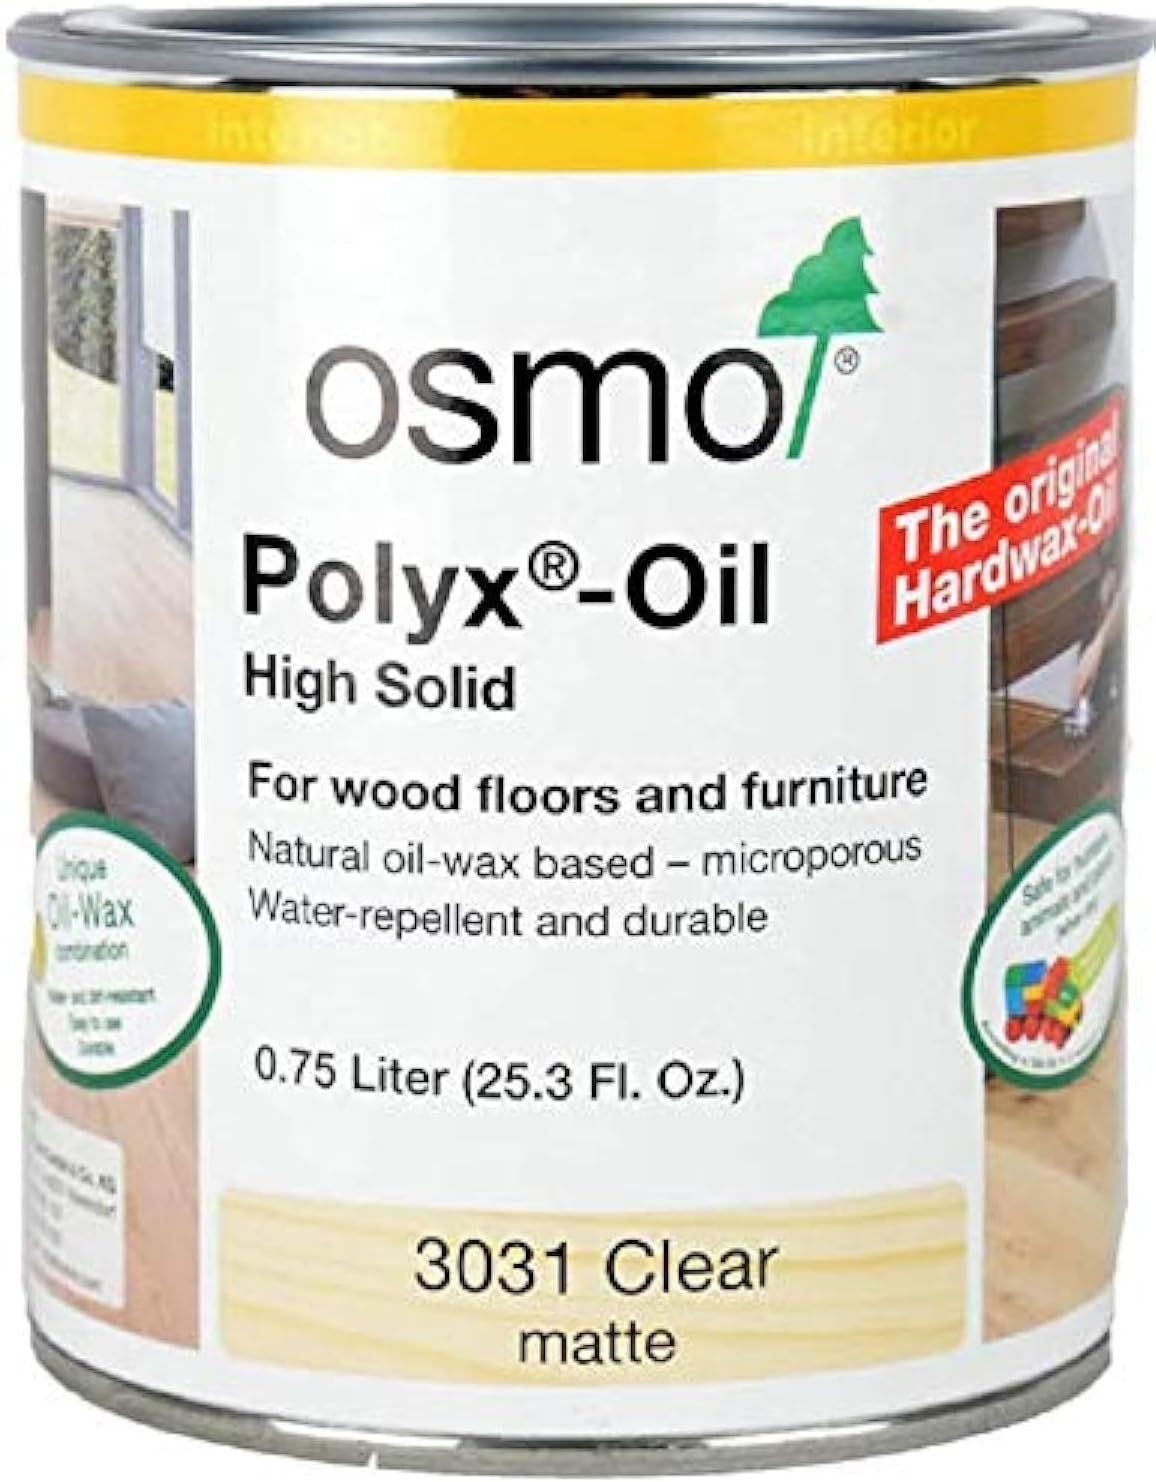 Osmo Polyx-Oil, 3031 Clear Matte - .750 Liter : Health & Household